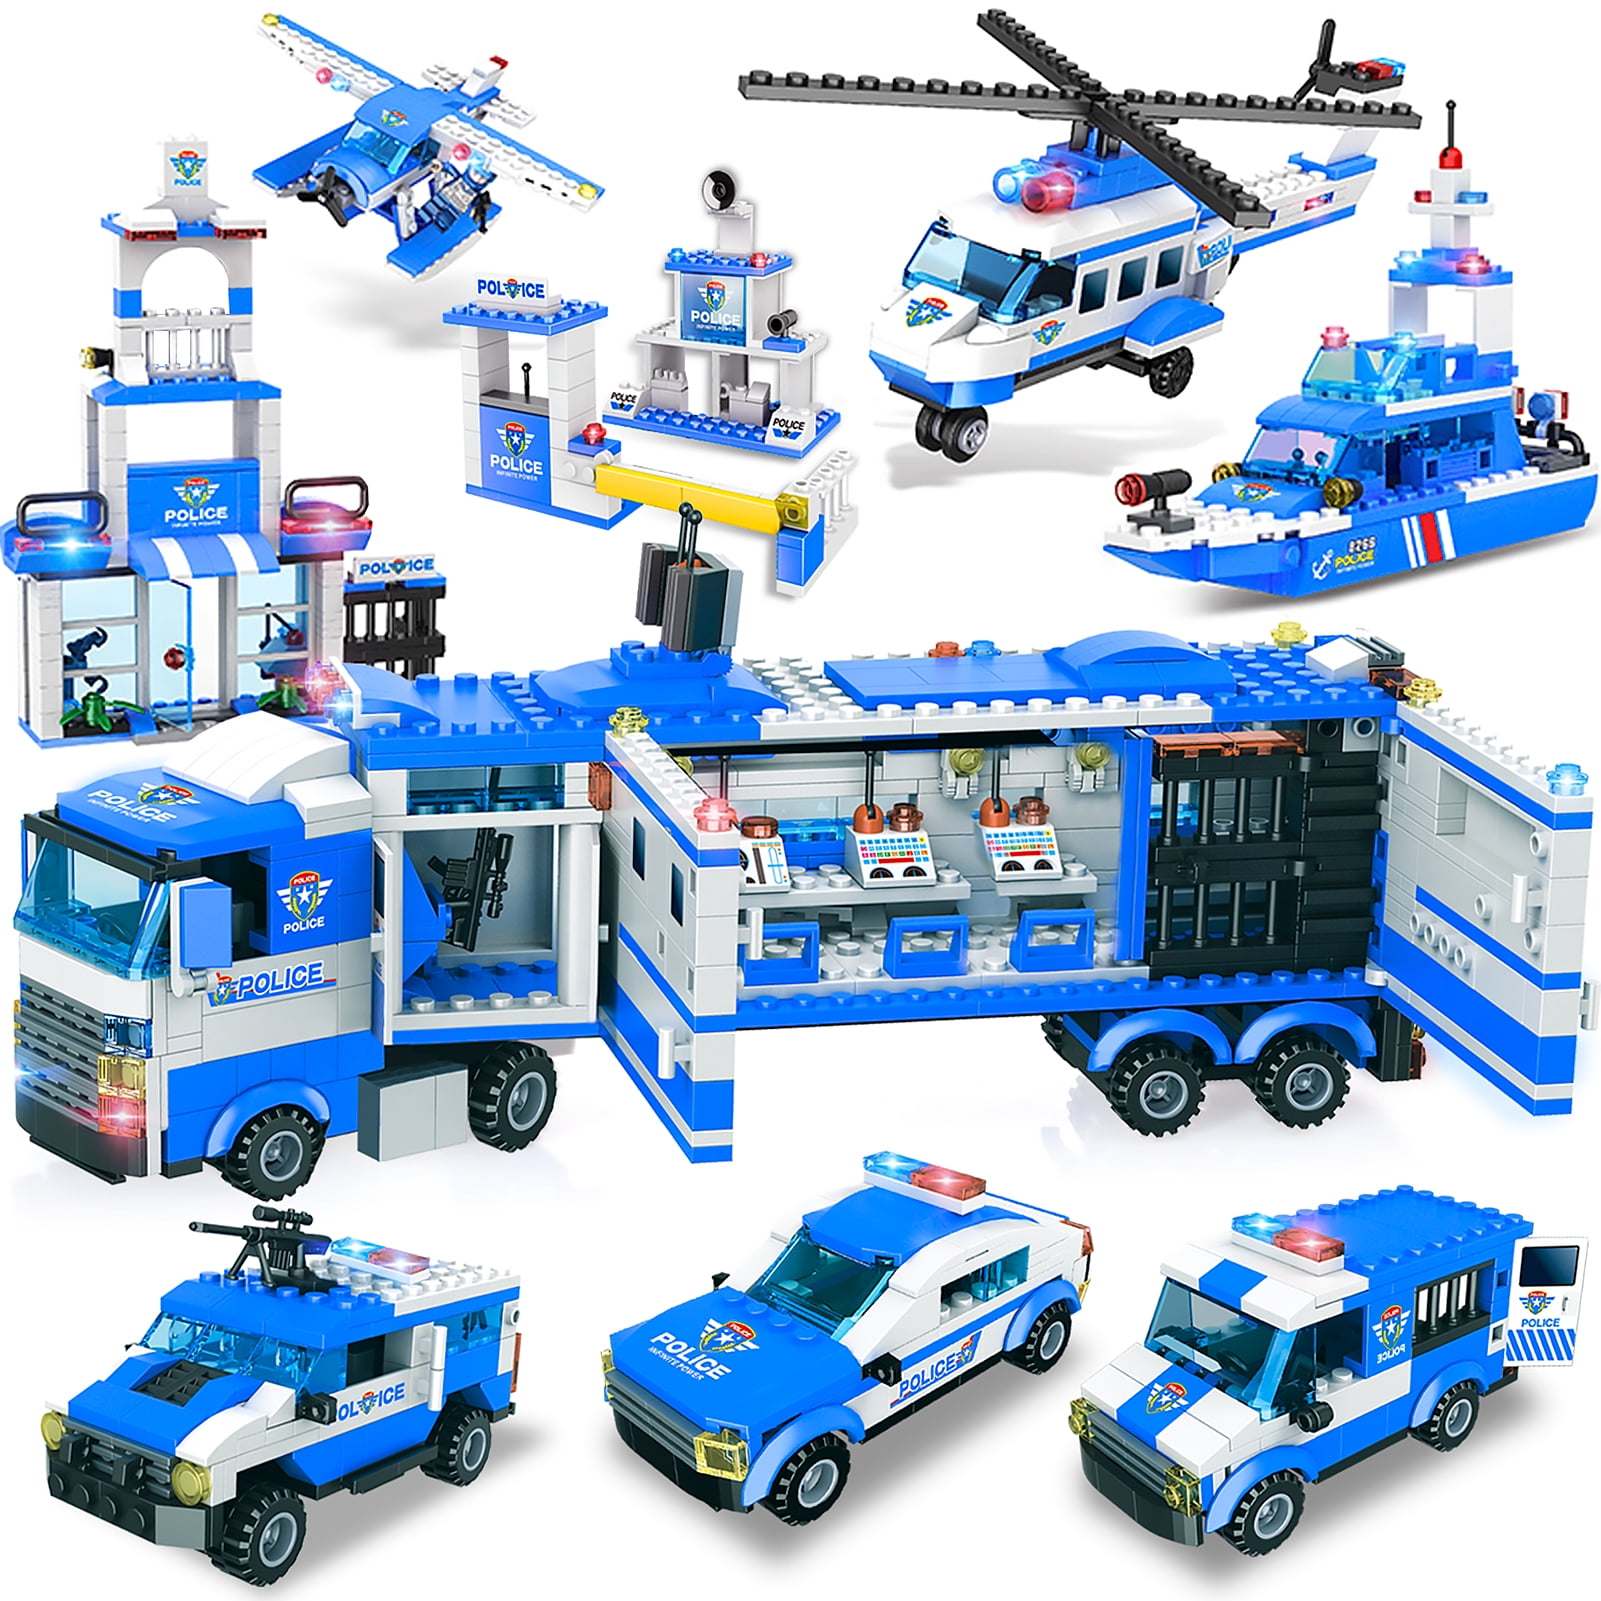 Details about   715 Pcs City Police Station Building Blocks SWAT Team Truck Educational Toys